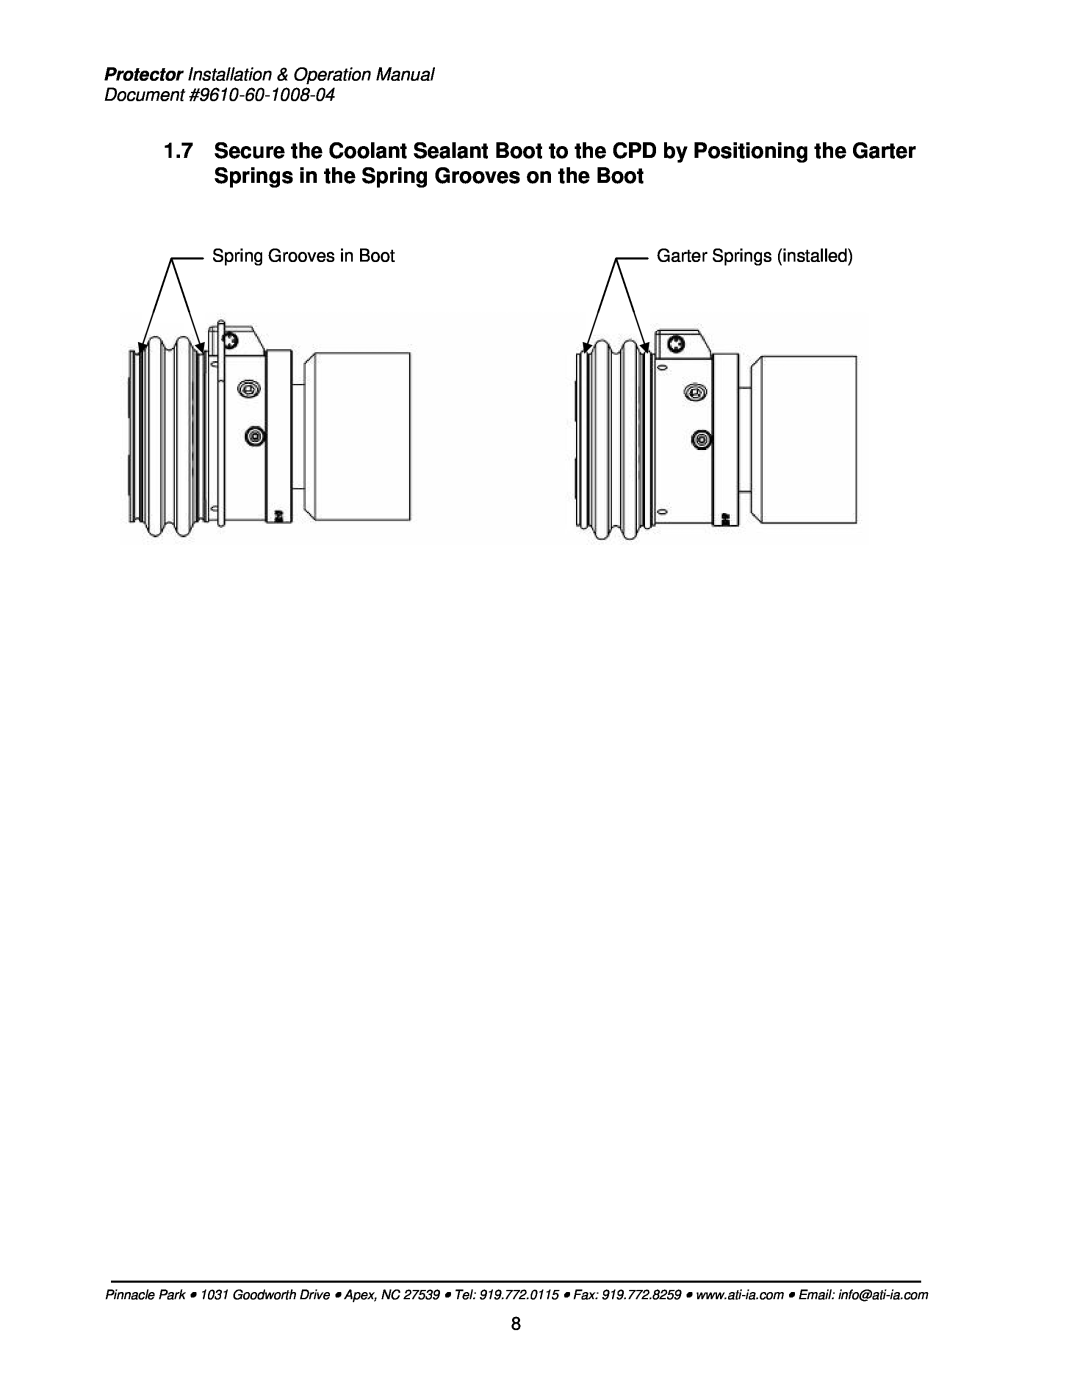 ATI Technologies SR-176, SR-61 Protector Installation & Operation Manual Document #9610-60-1008-04, Spring Grooves in Boot 